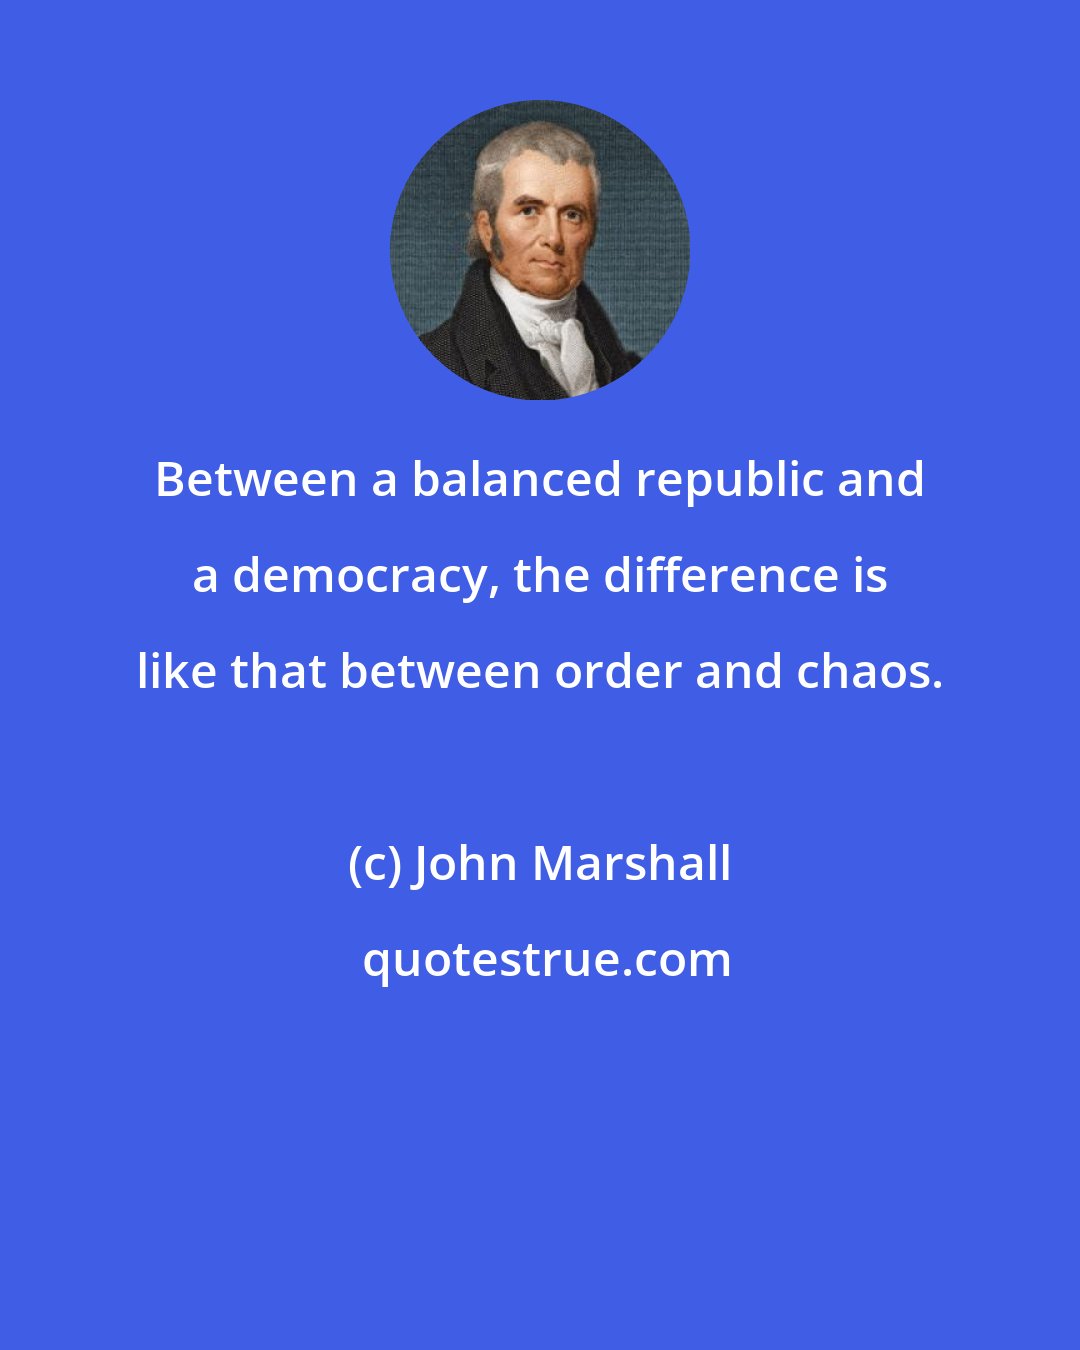 John Marshall: Between a balanced republic and a democracy, the difference is like that between order and chaos.